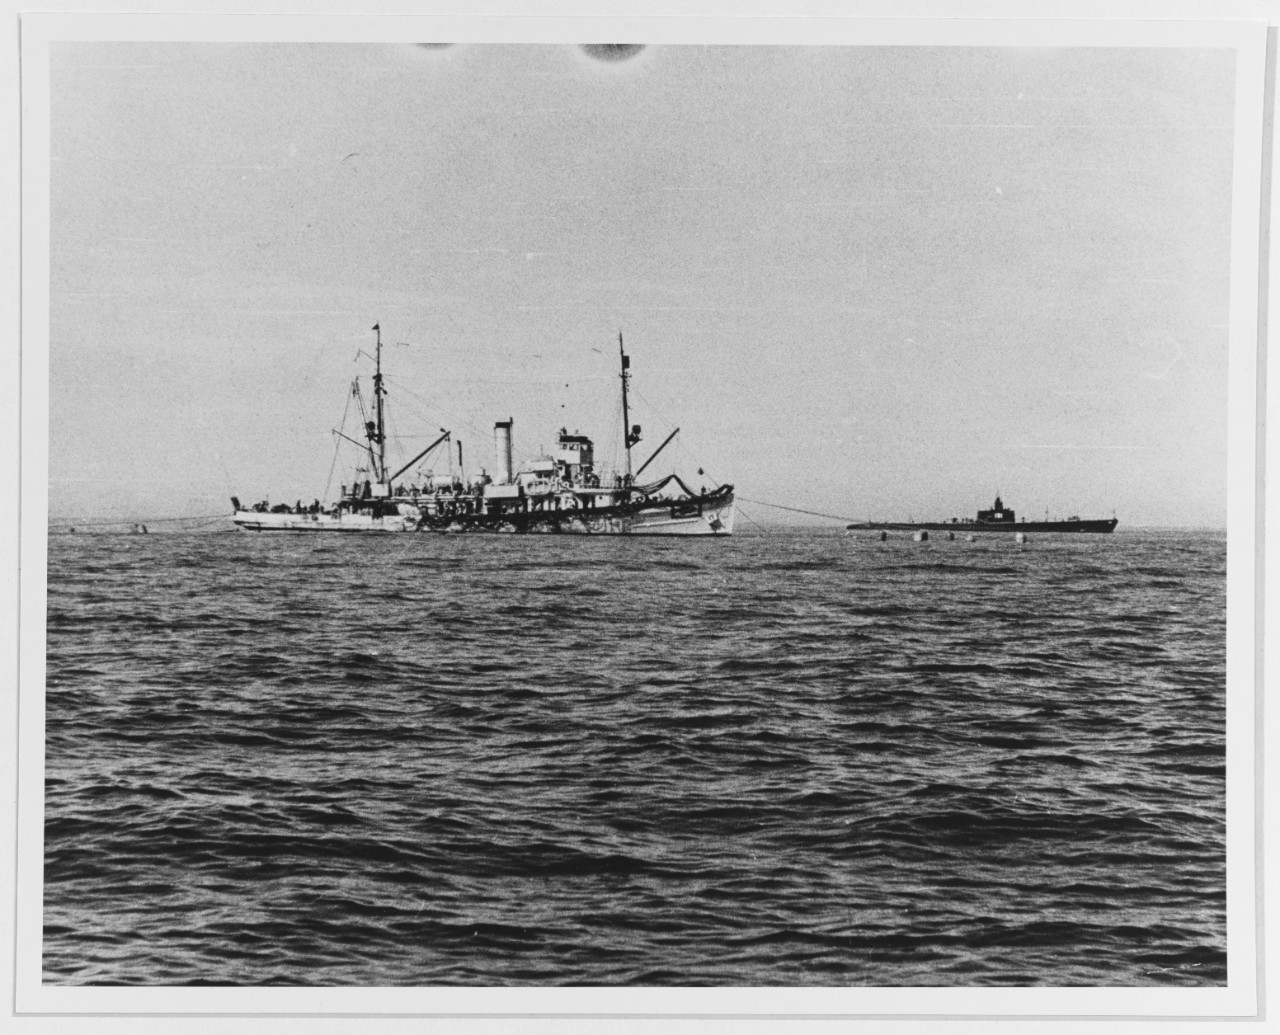 Photo #: USN 1149028  Salvage of USS Squalus (SS-192), 1939